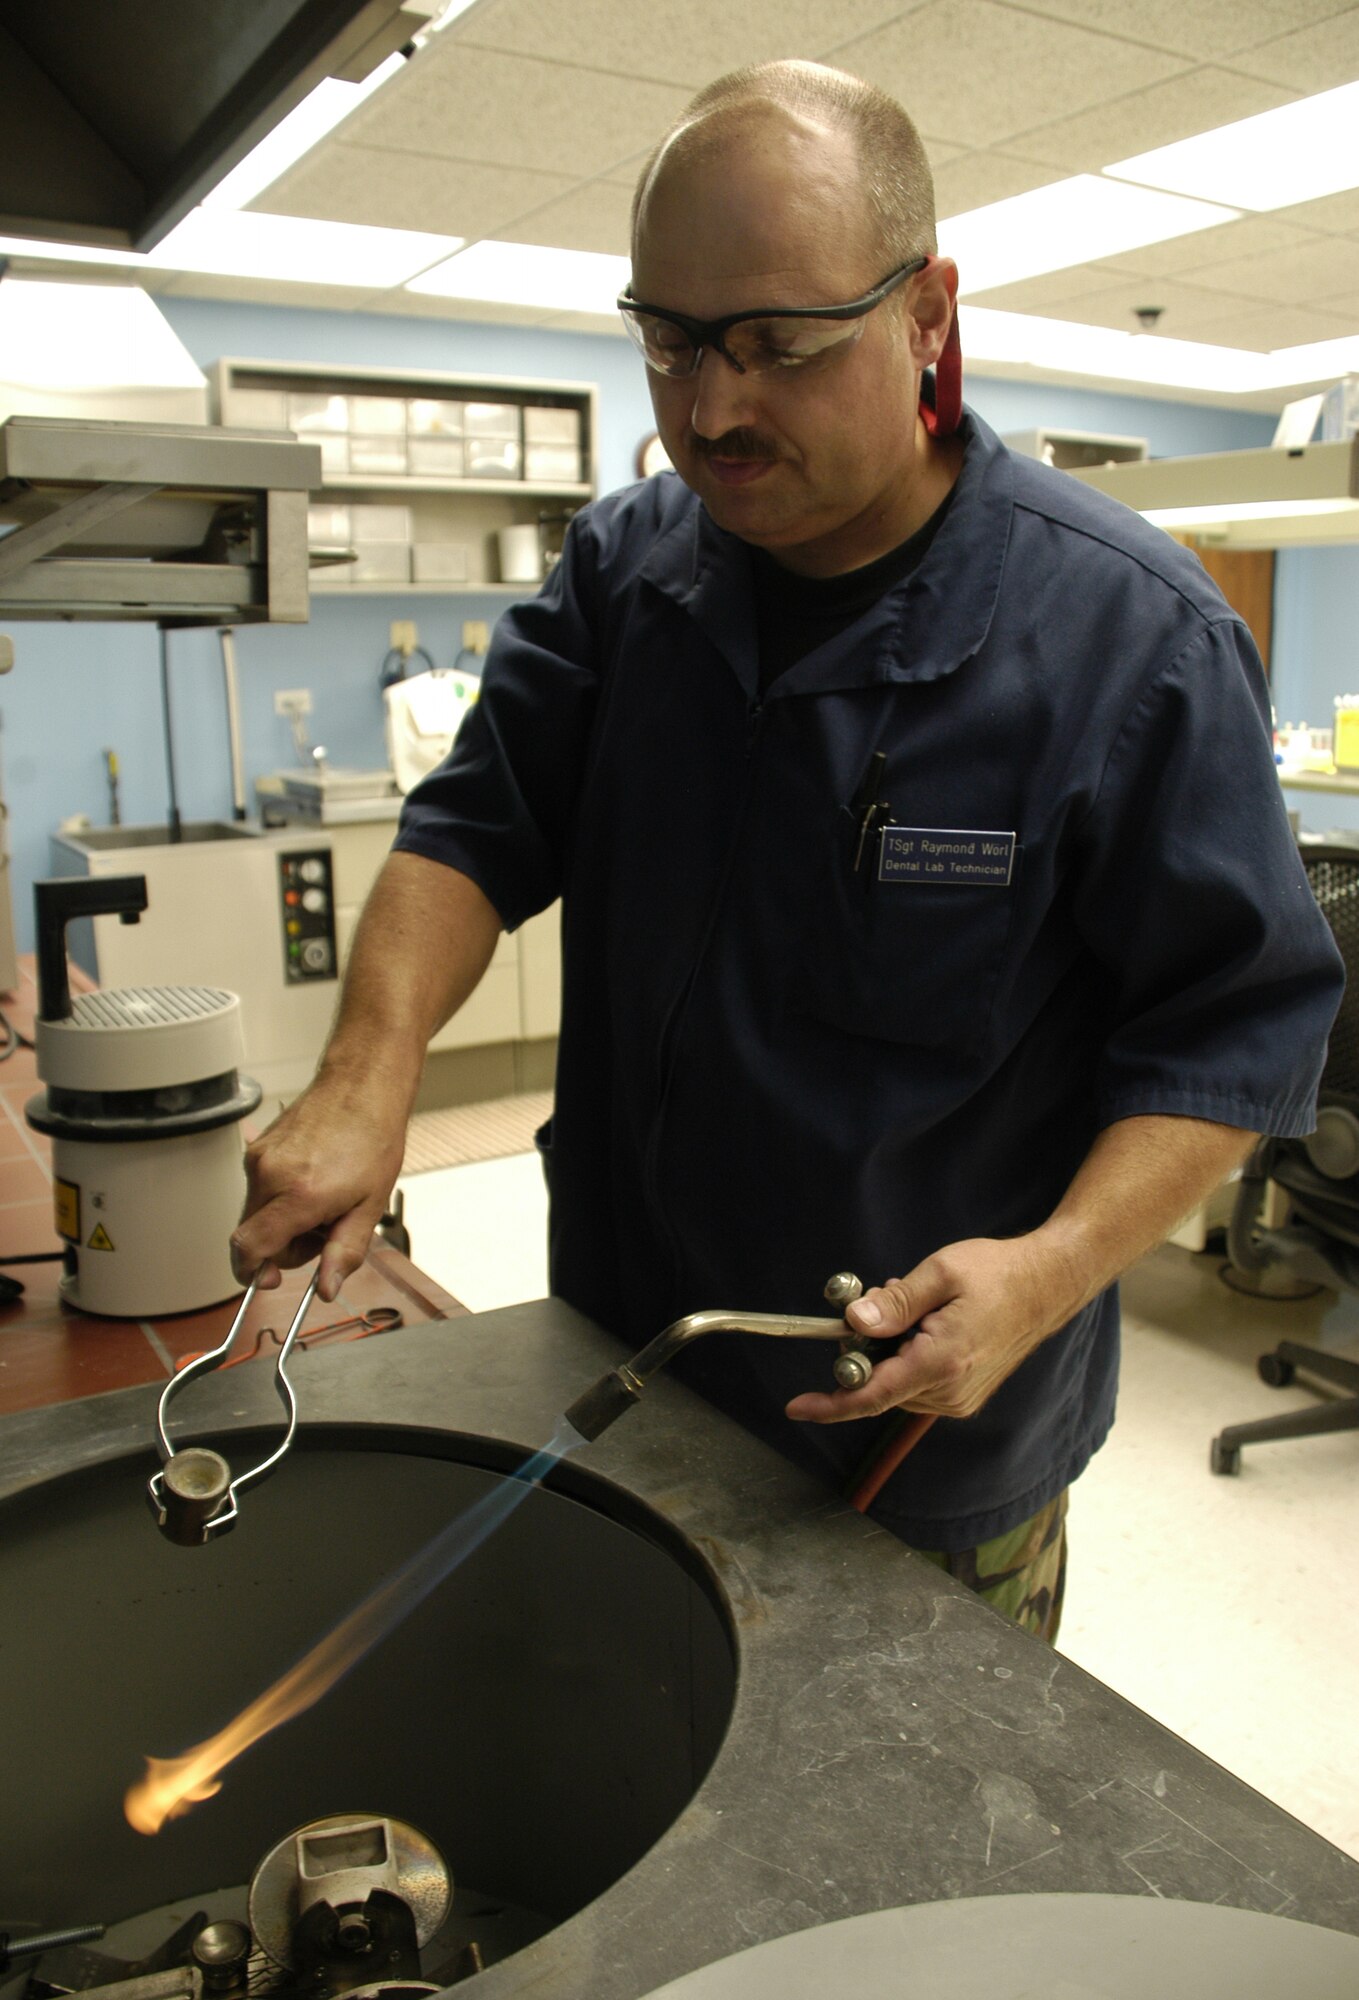 DOVER AIR FORCE BASE, Del. – Tech. Sgt. Raymond Worl, 436th Dental Squadron NCO in-charge of the dental laboratory, uses a propane gas and oxygen torch to melt the metal which will be cast into the tooth mold. This will create either a gold or silver crown, or the metal substructure needed to apply porcelain for a porcelain-fused metal crown. (U.S. Air Force photo/ Airman 1st Class Shen-Chia Chu)